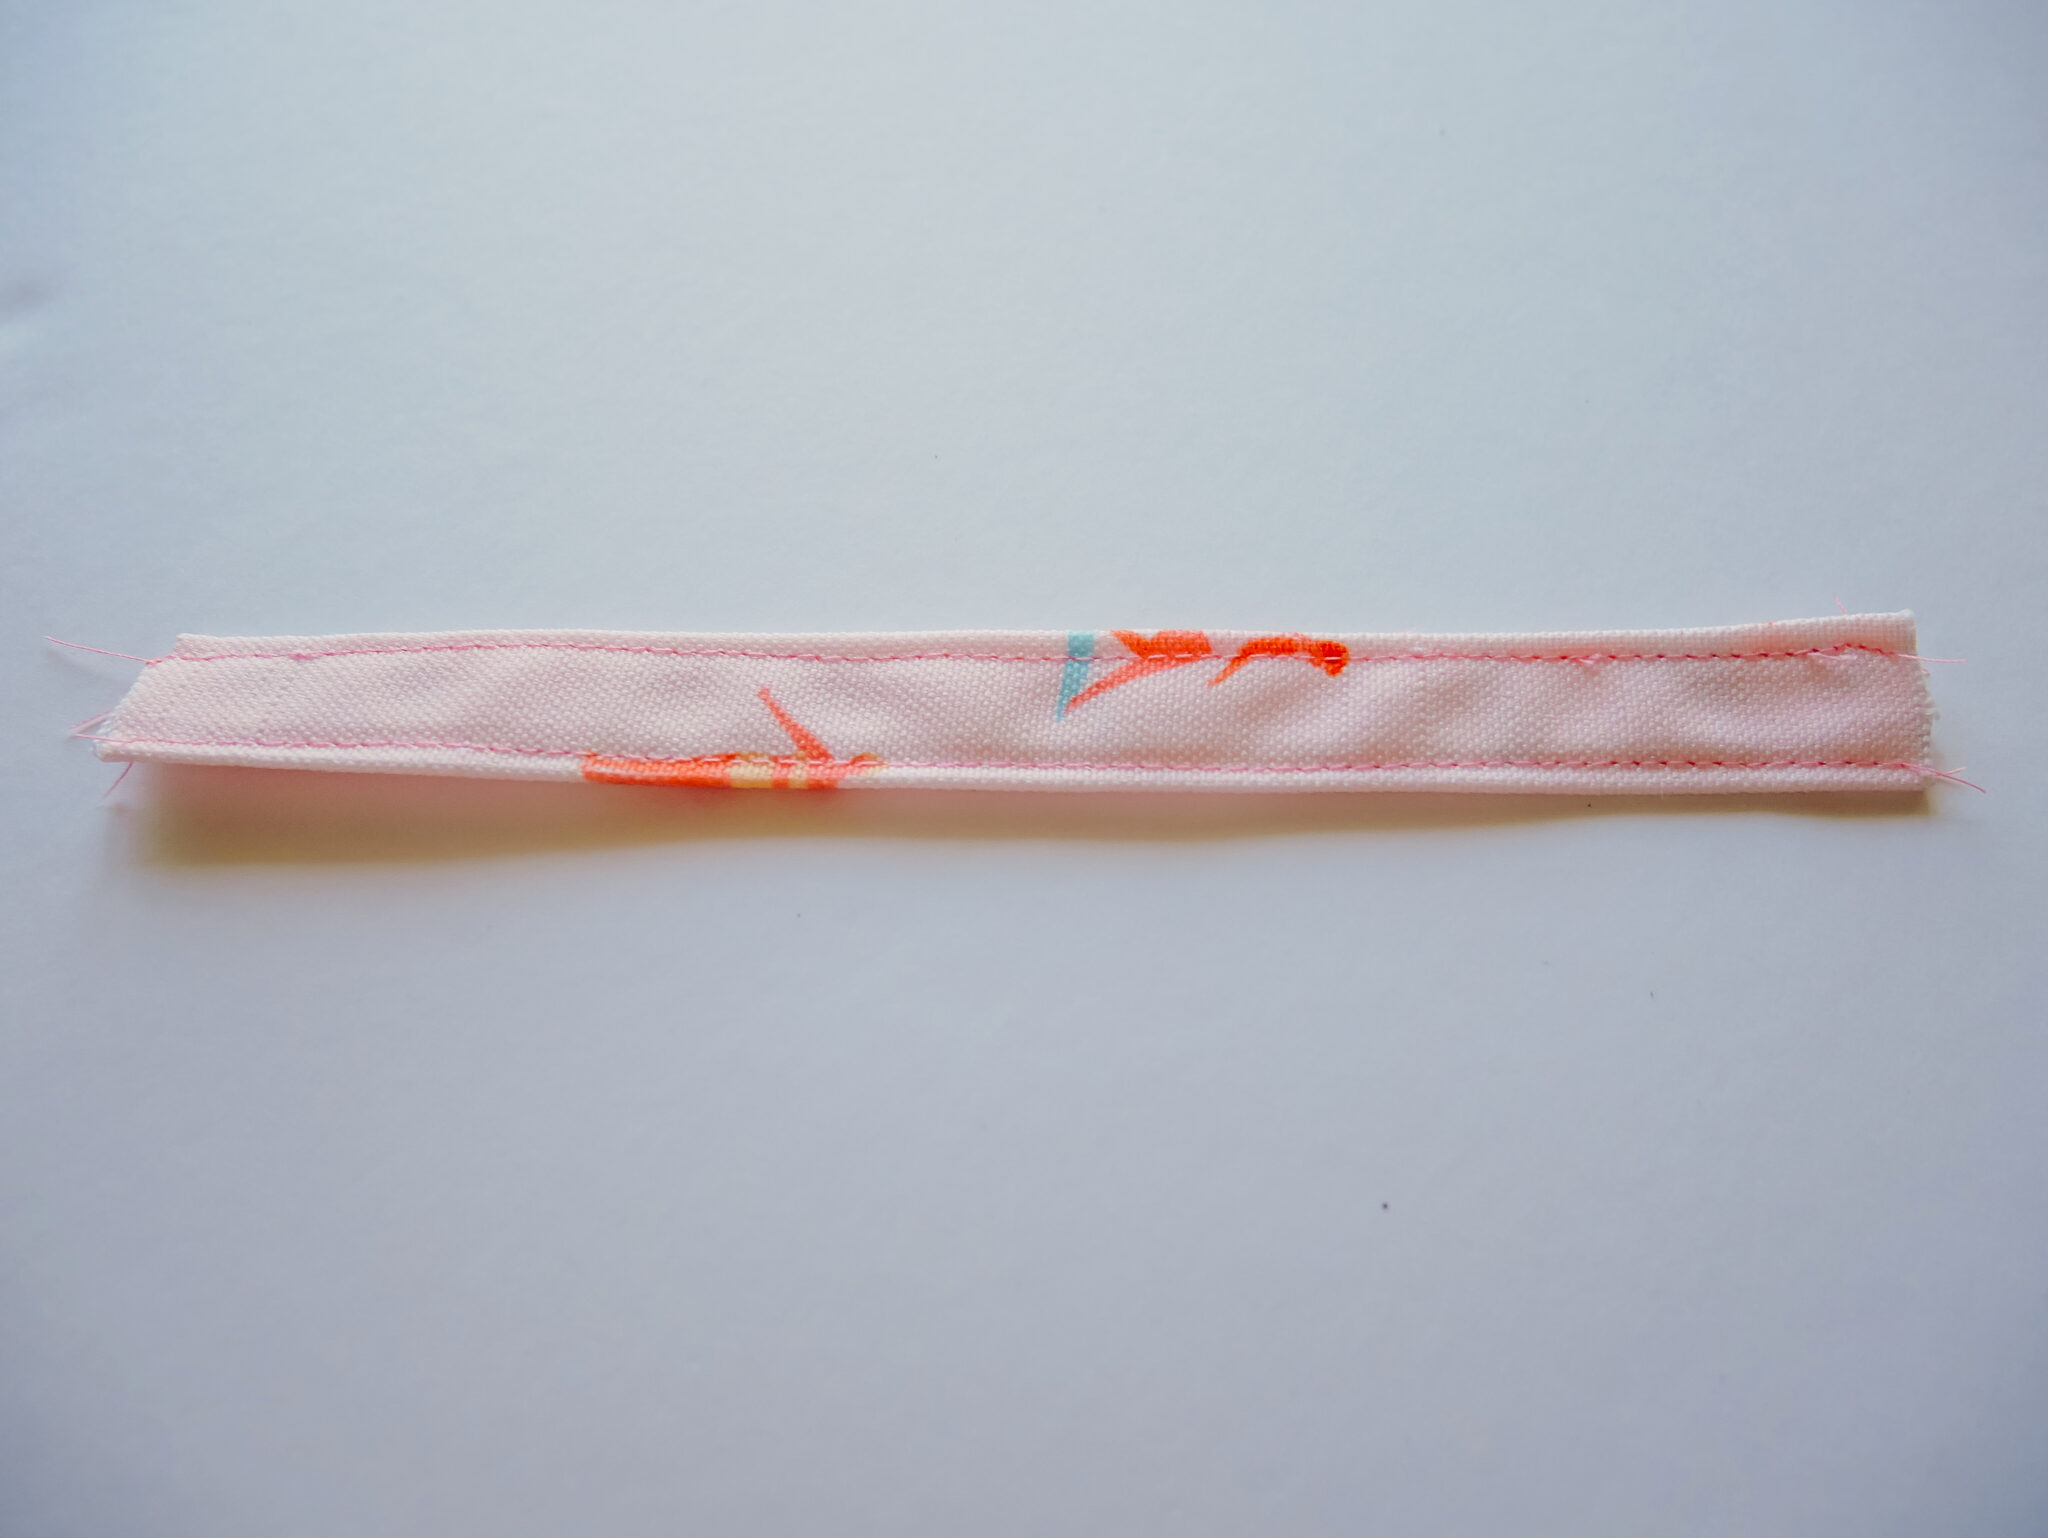 A small rectangle of fabric has been sewn along the top edge and the bottom edge. The fabric features a design with small female surfers surfing through a pink background.